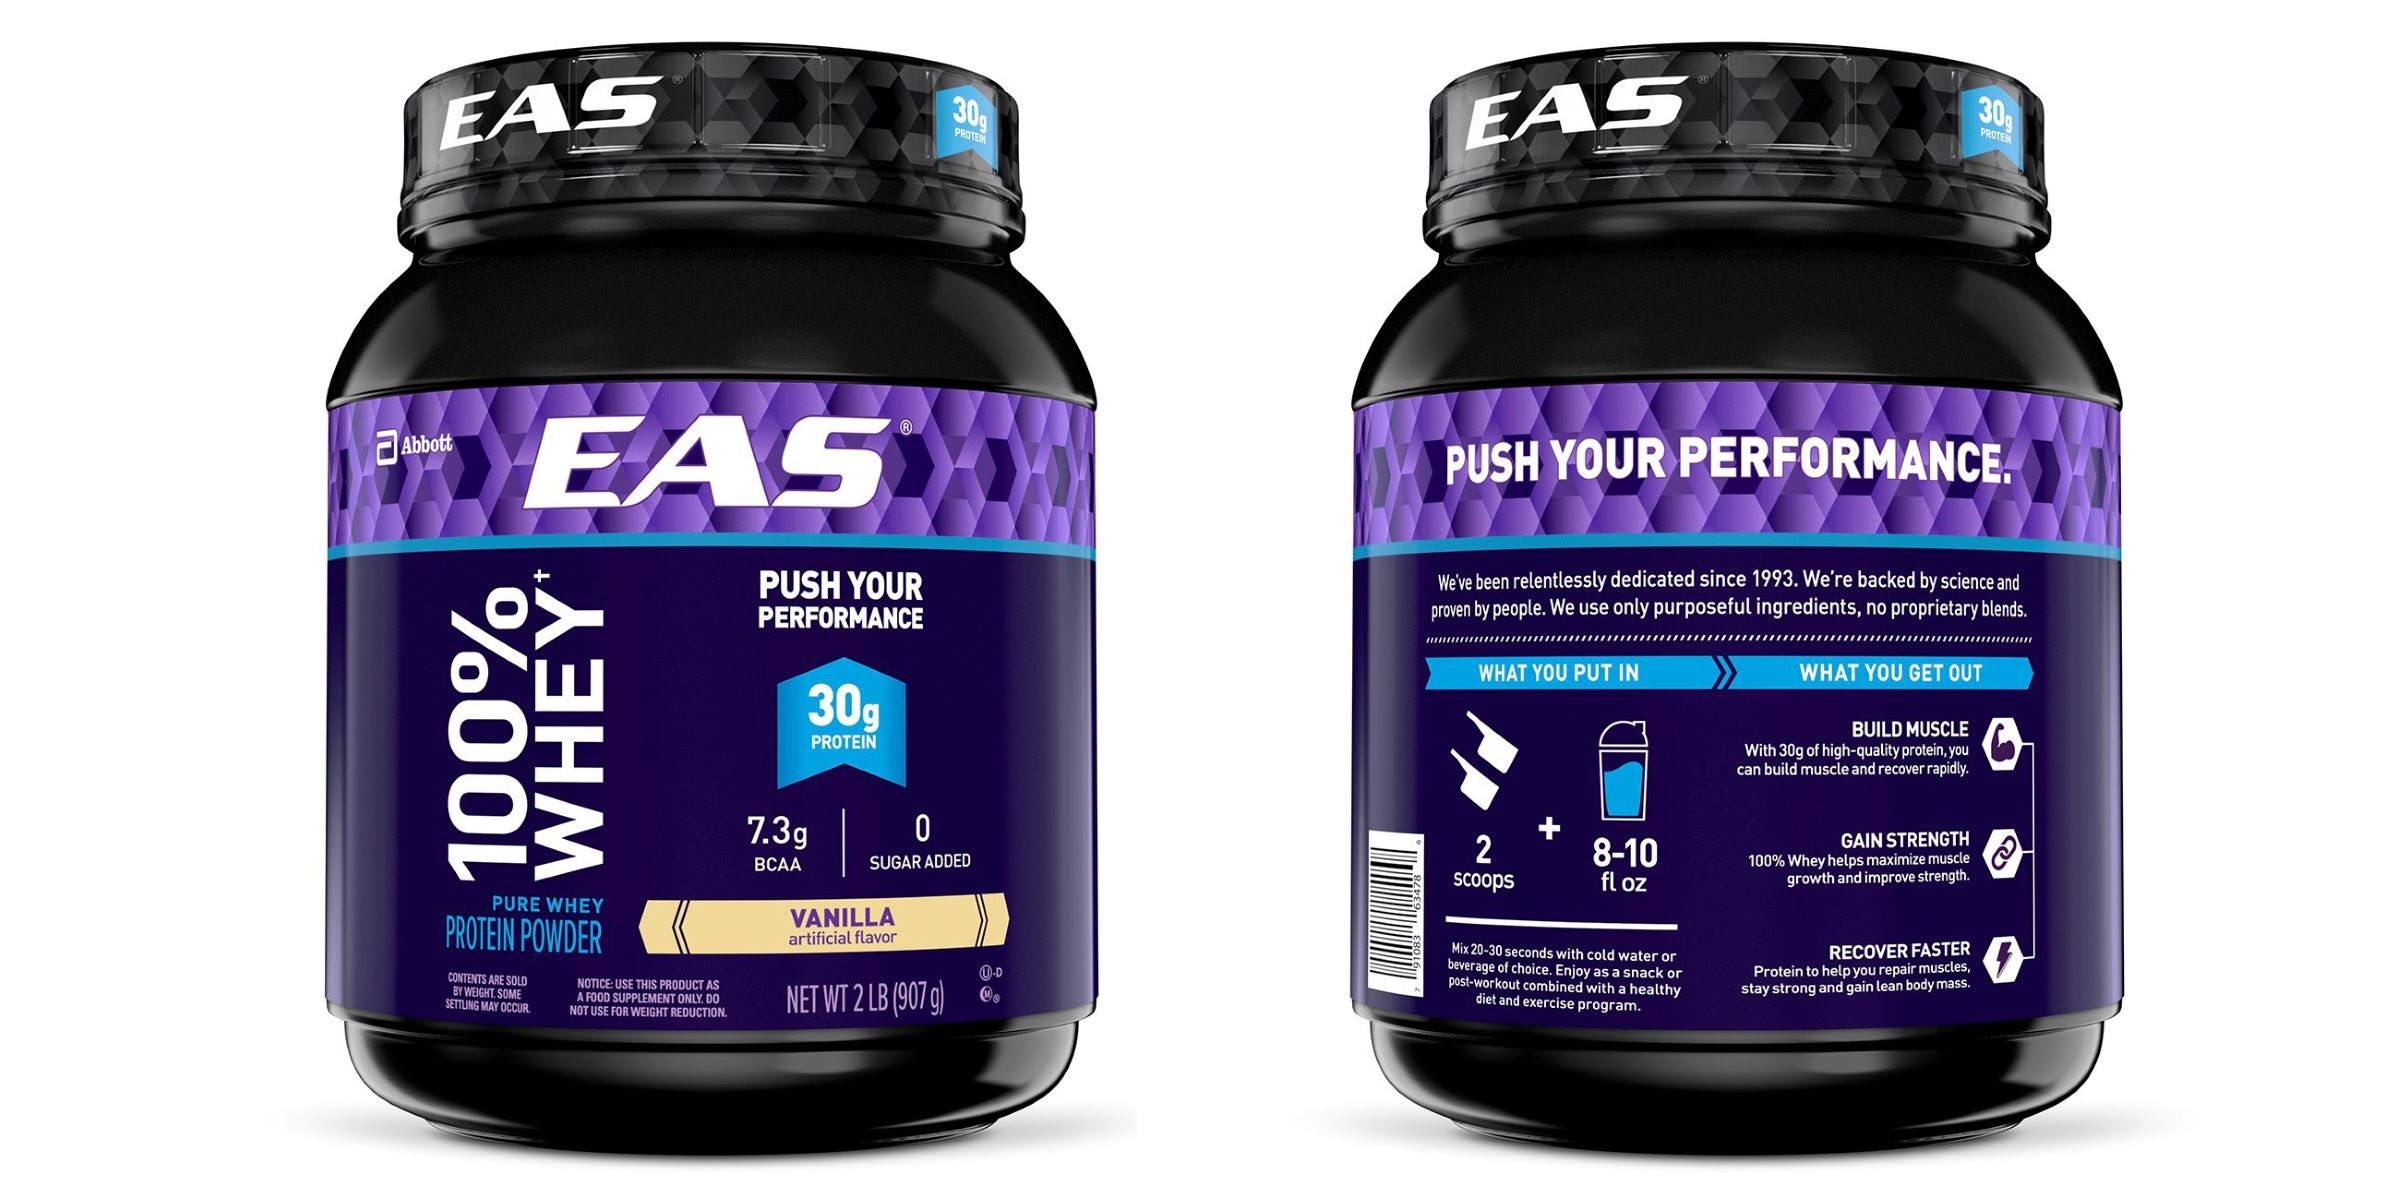 11-eas-whey-protein-powder-nutrition-facts